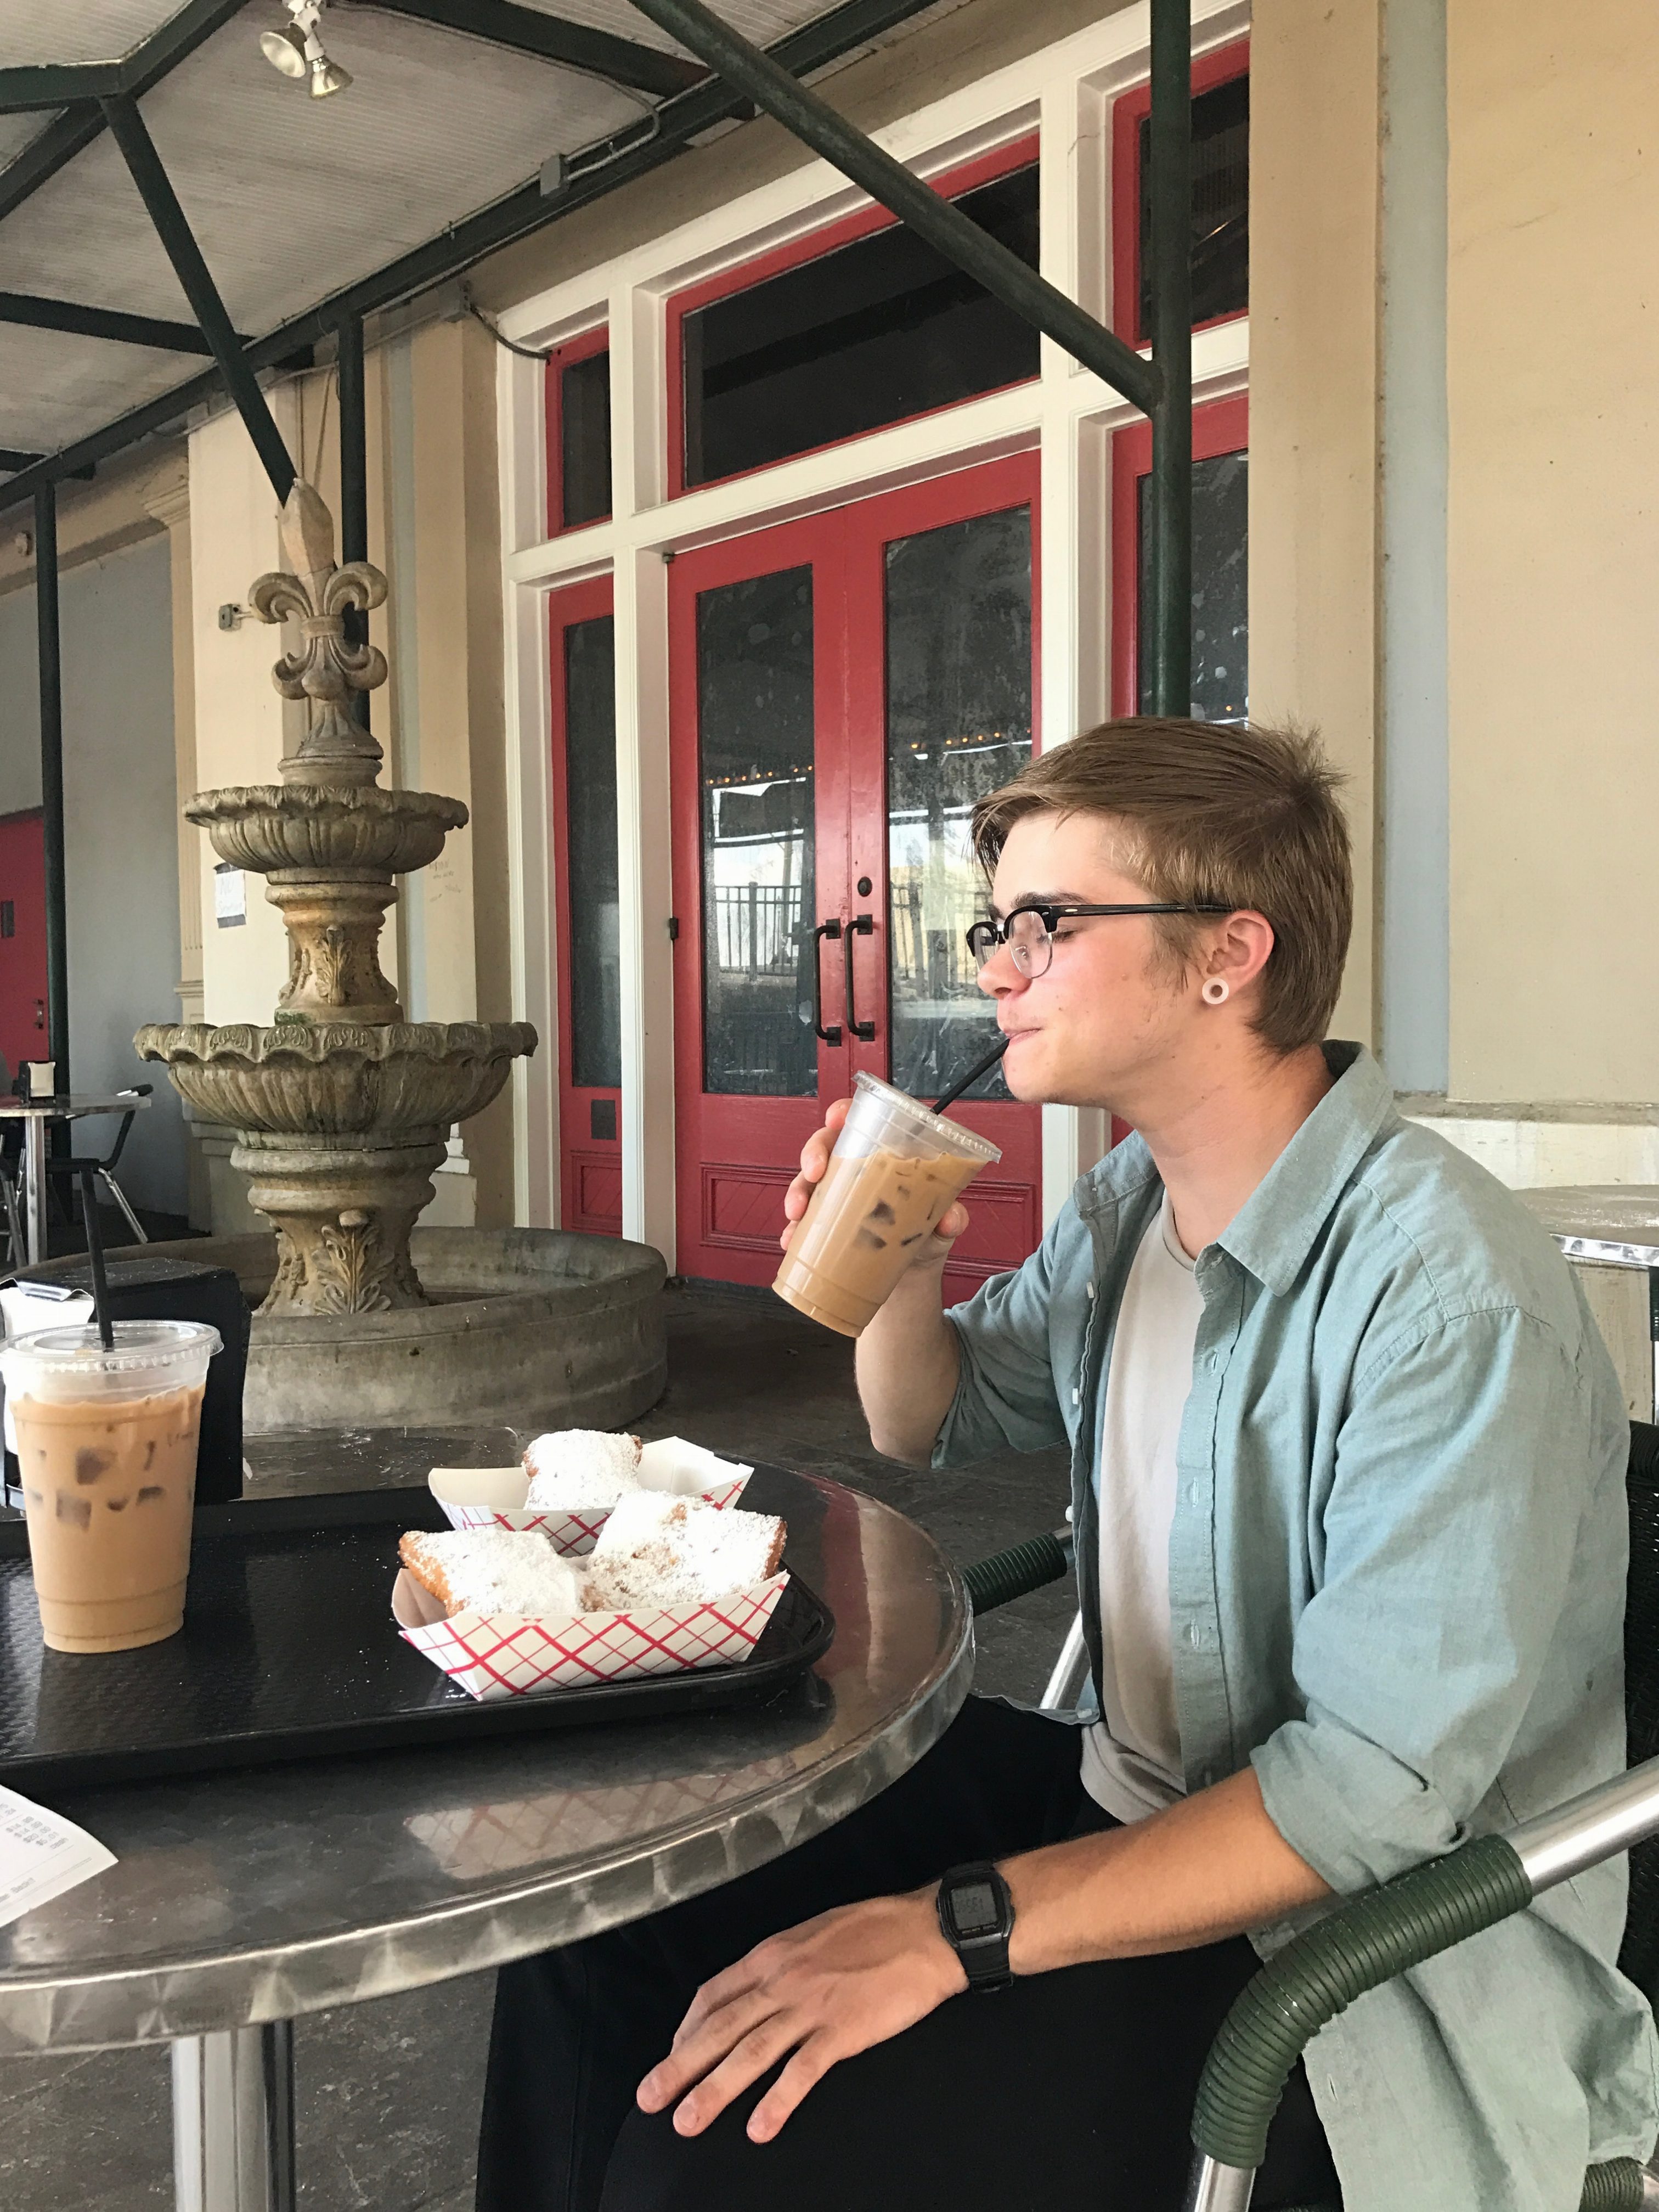 College kids and car trips:  My New Orleans experience